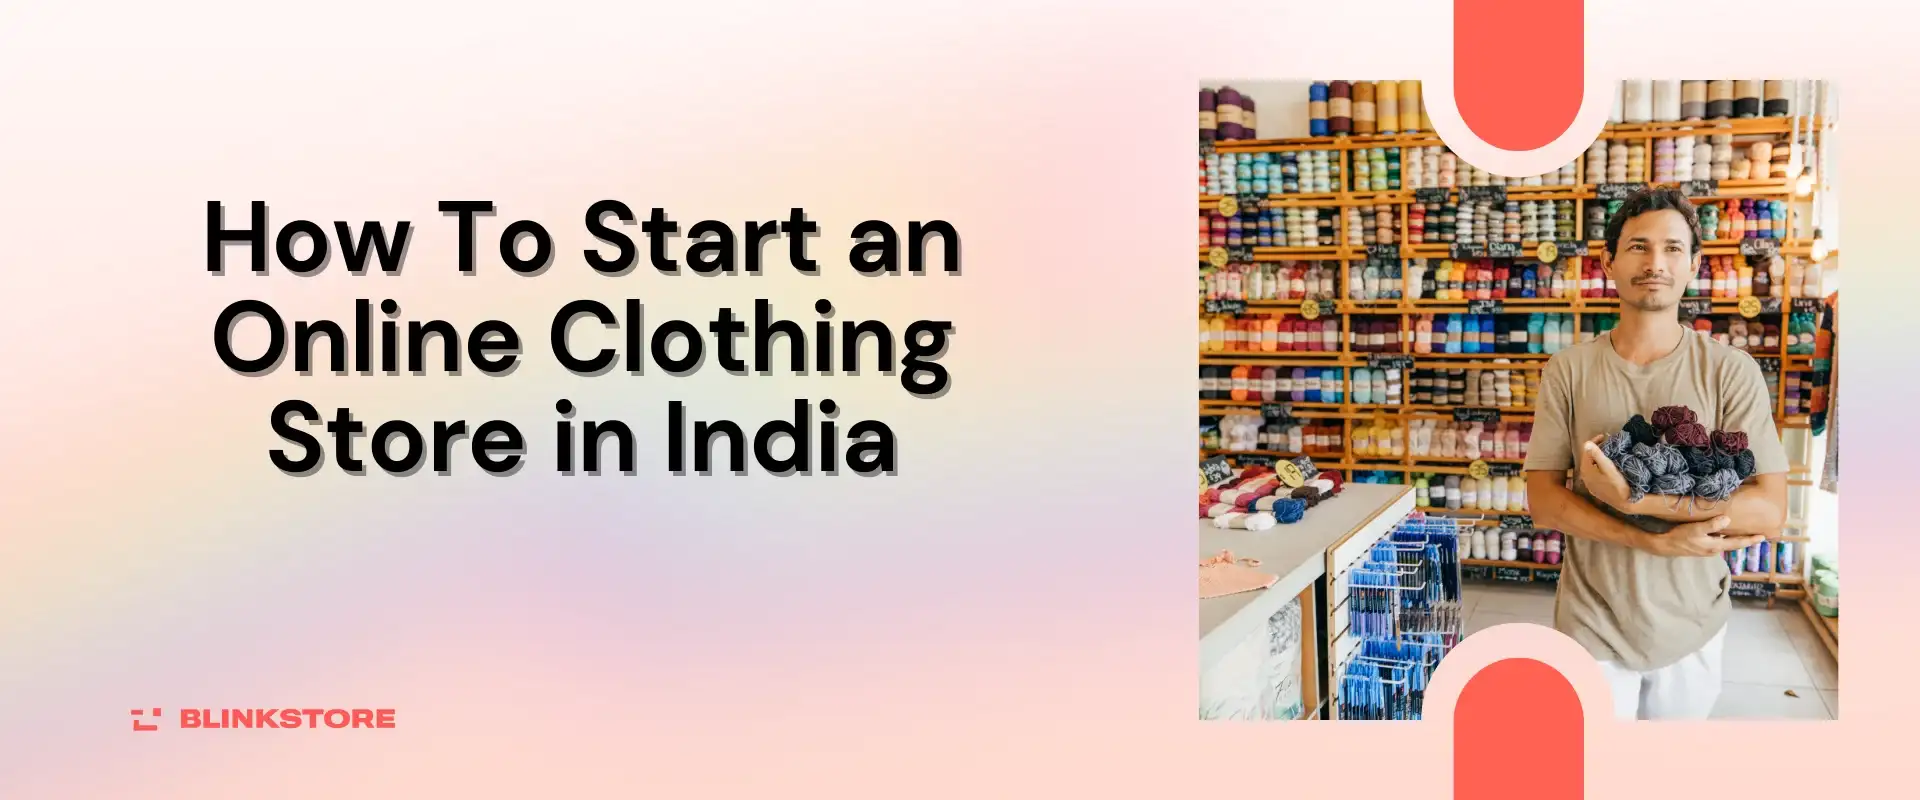 How To Start an Online Clothing Store in India